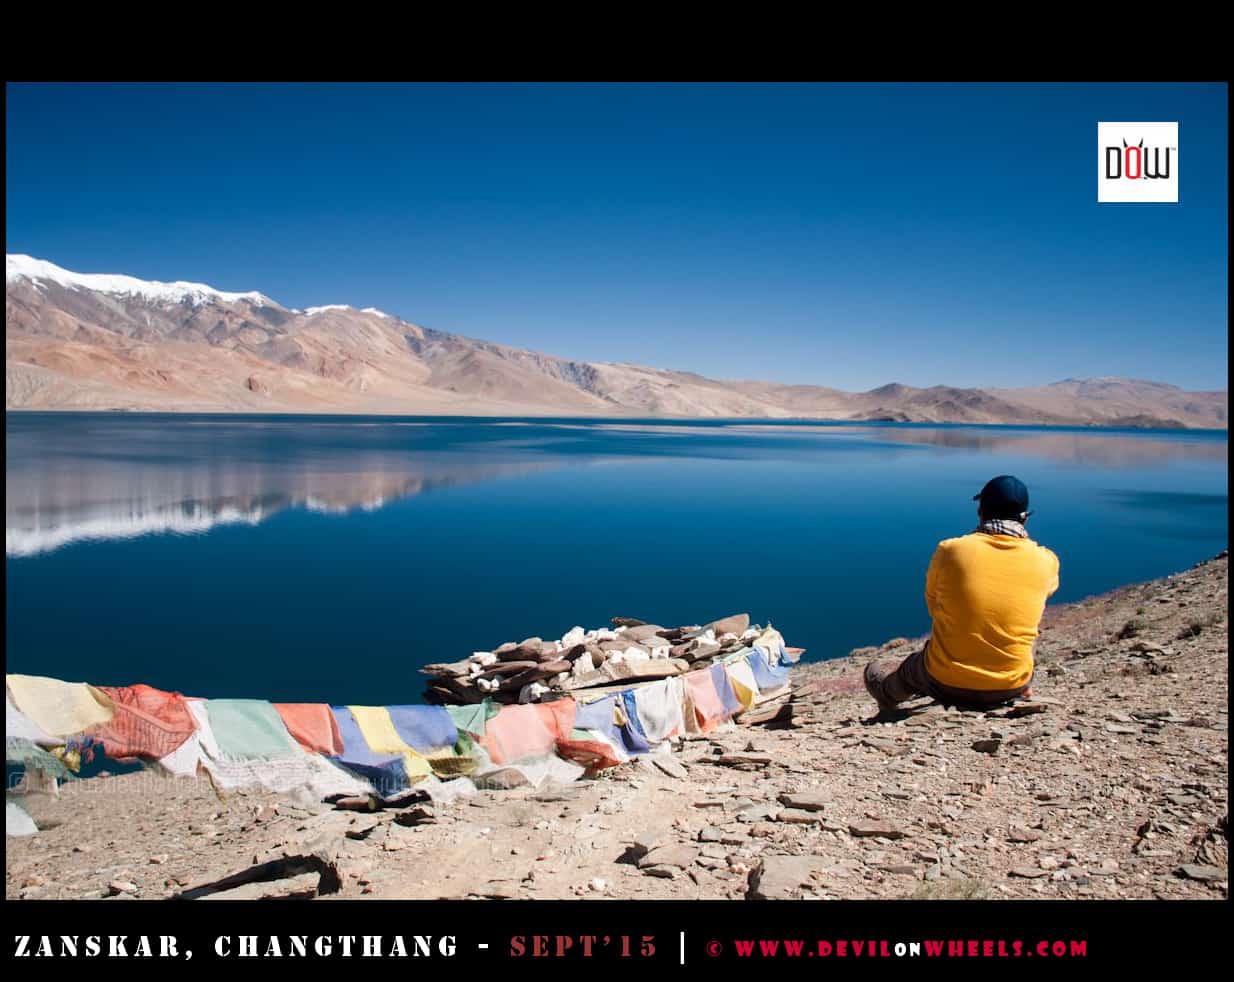 Still, wondering about a Solo Trip to Ladakh??